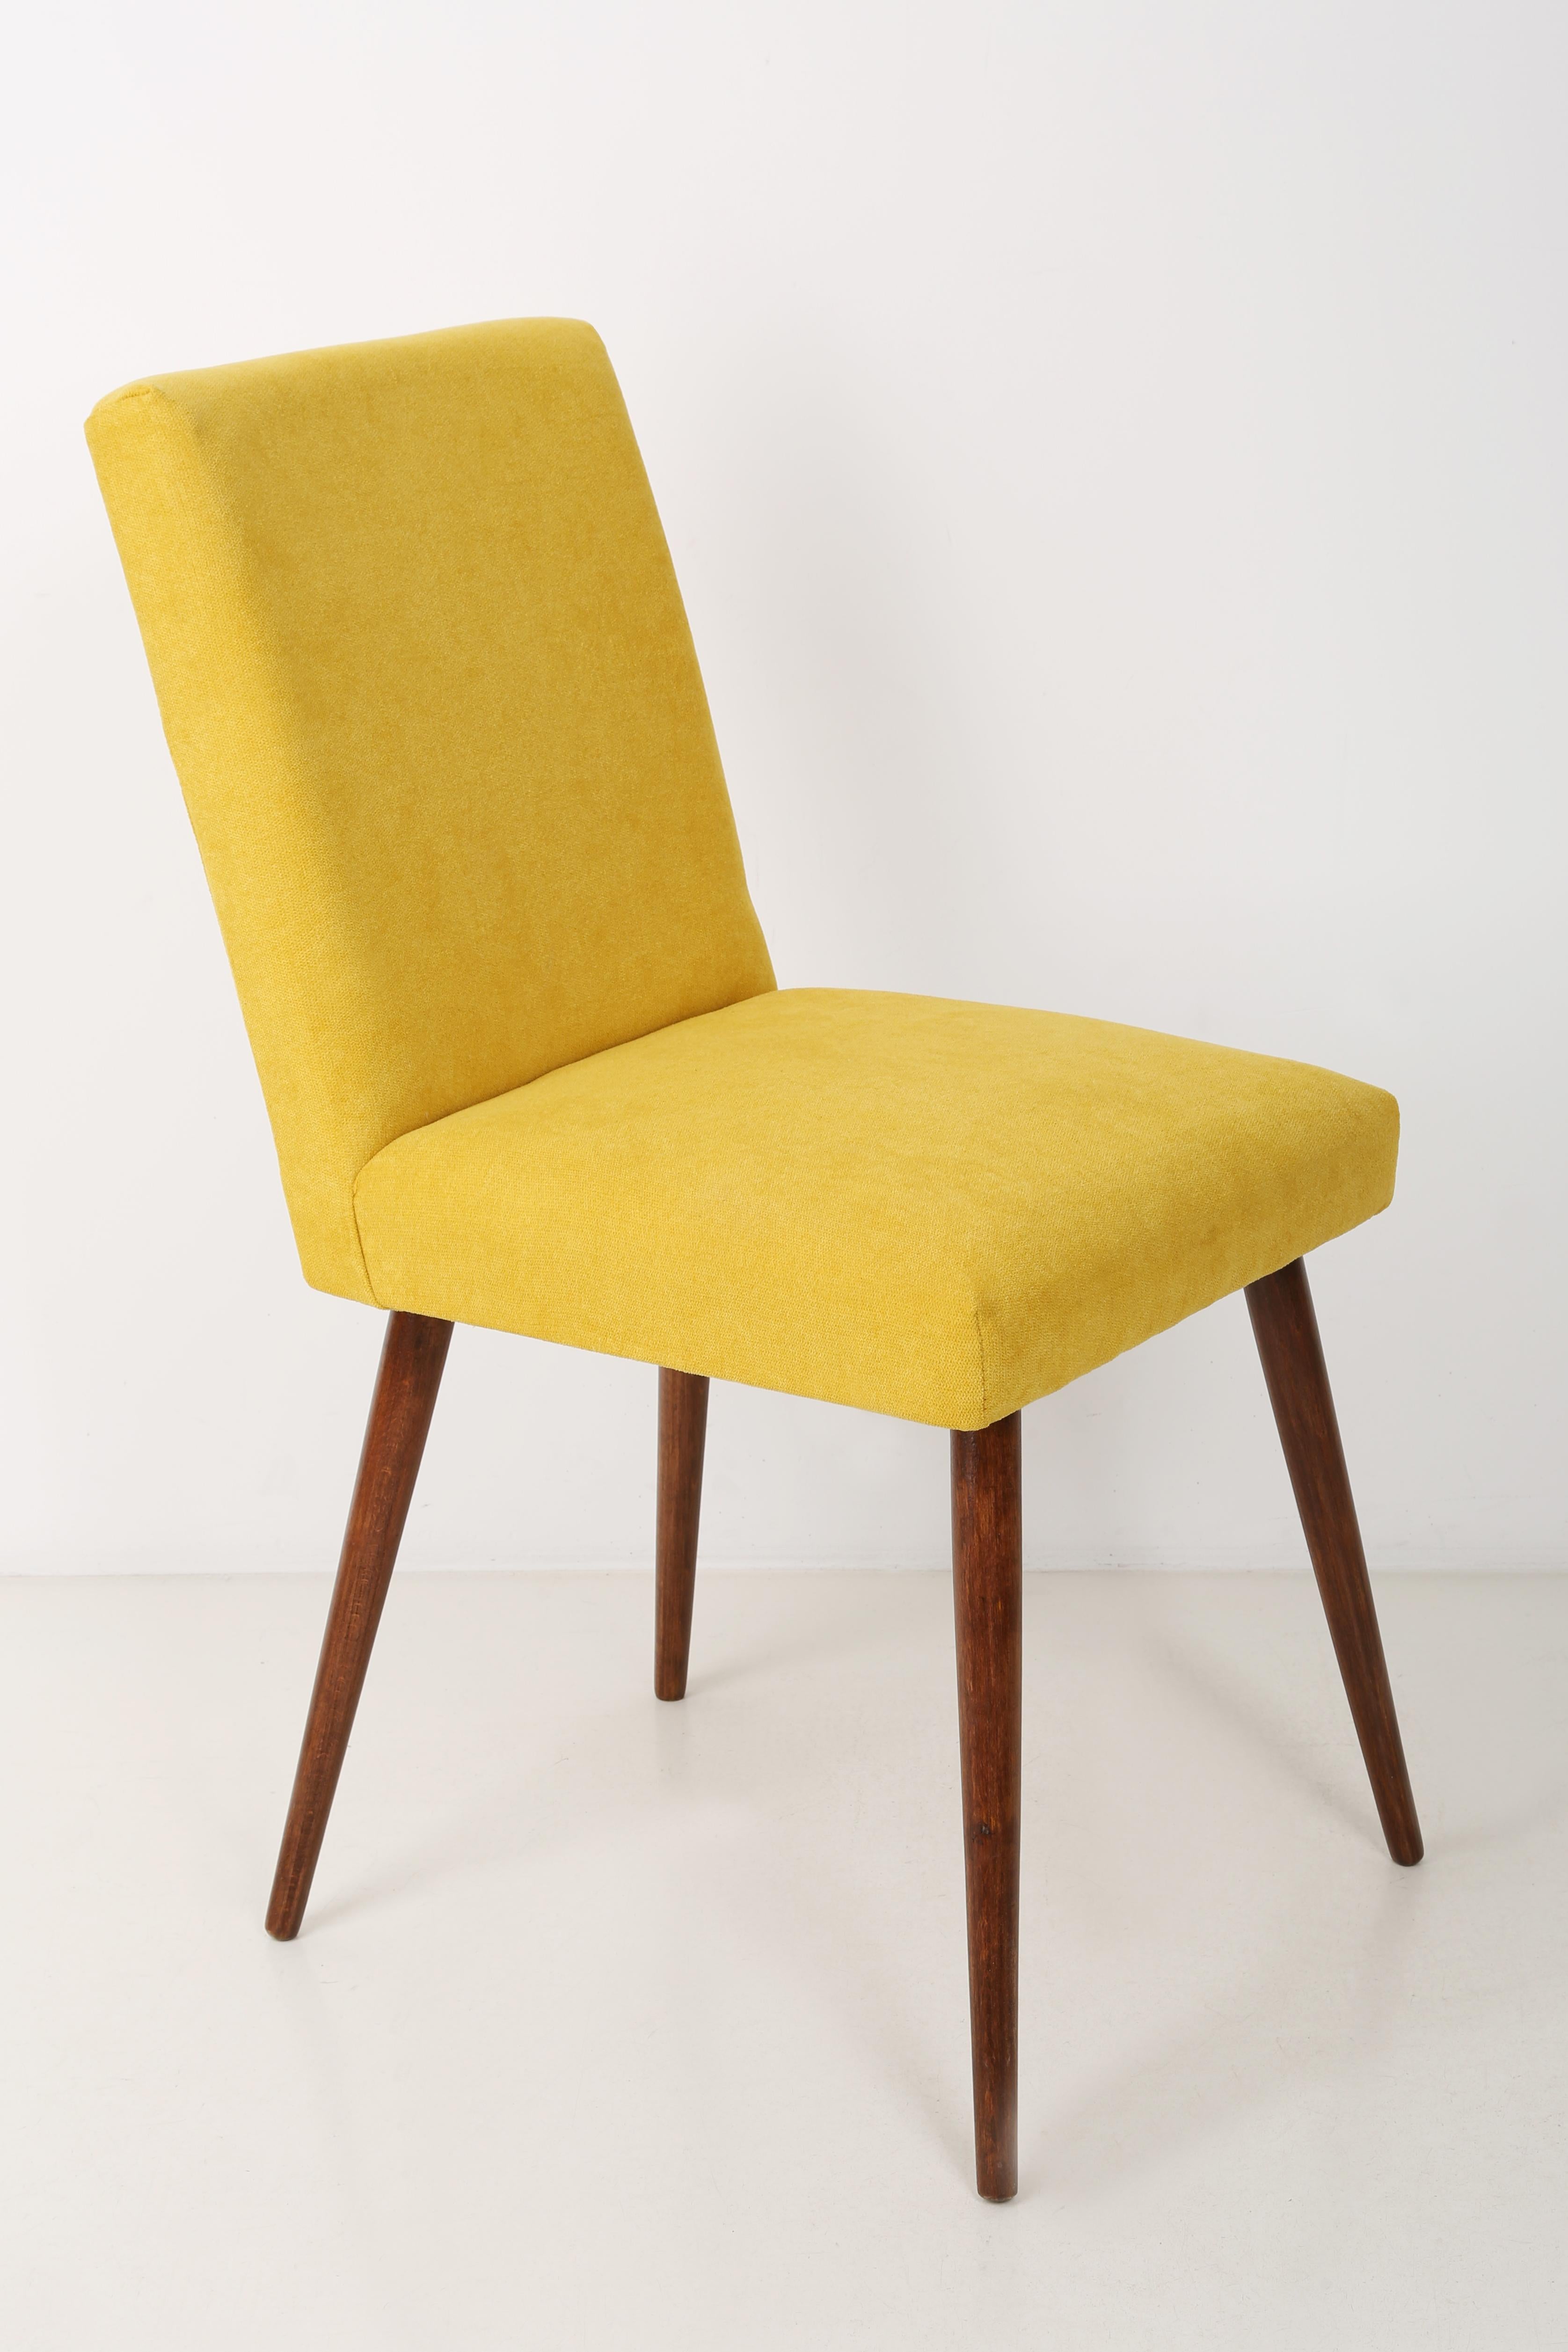 Mid-Century Modern Mid Century Gray Wool Chair, Poland, 1960s. For Sale